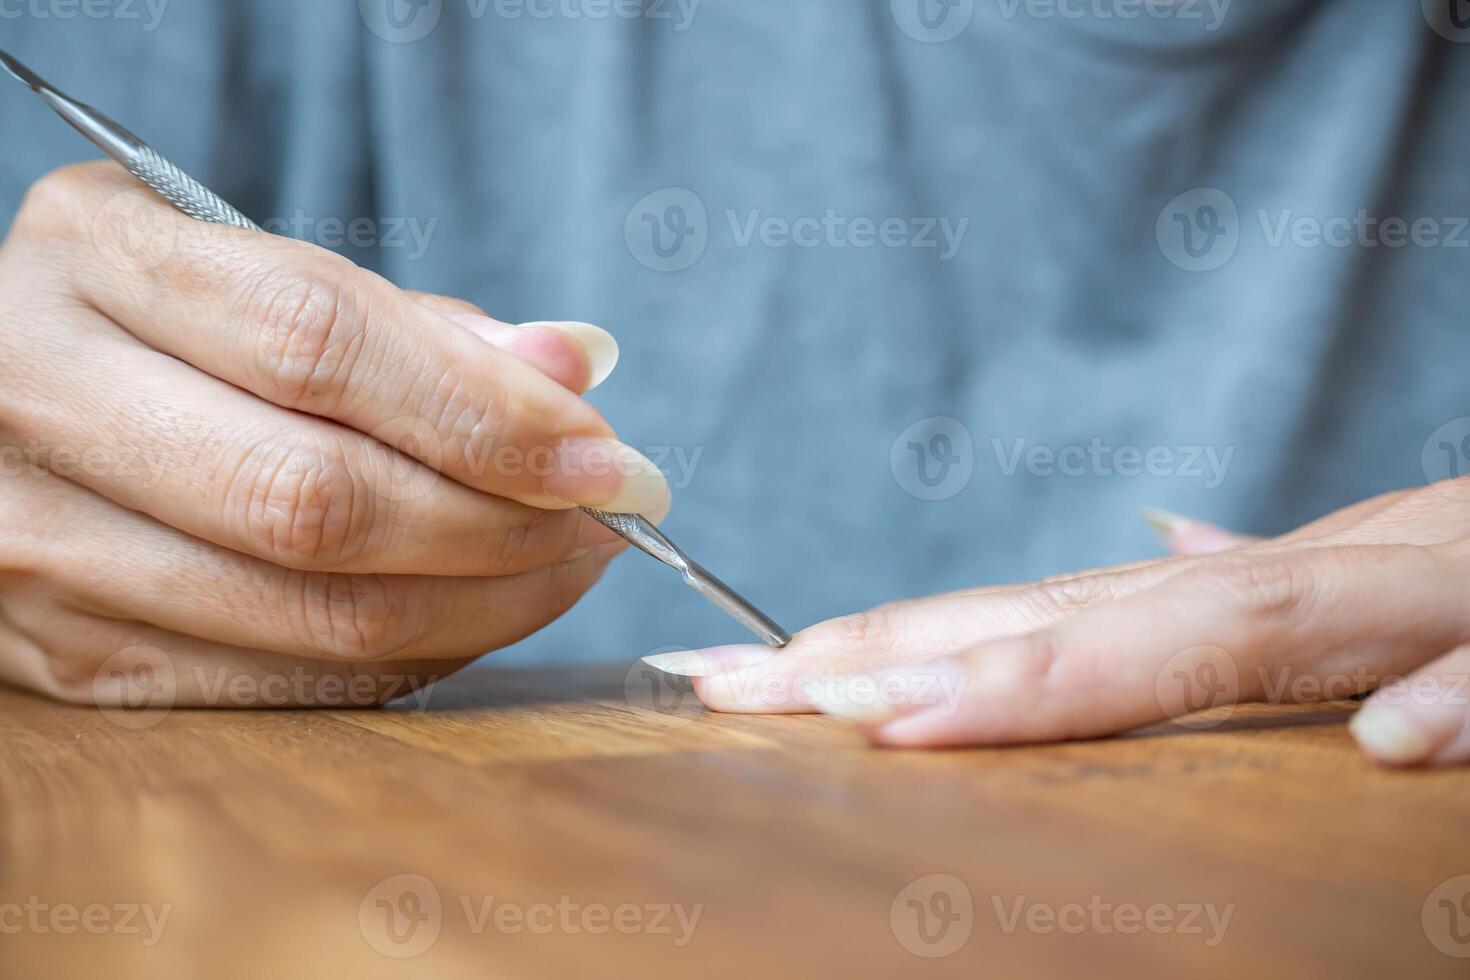 Woman using a cuticle pusher on her nails. Nail preparation process before applying polish. photo